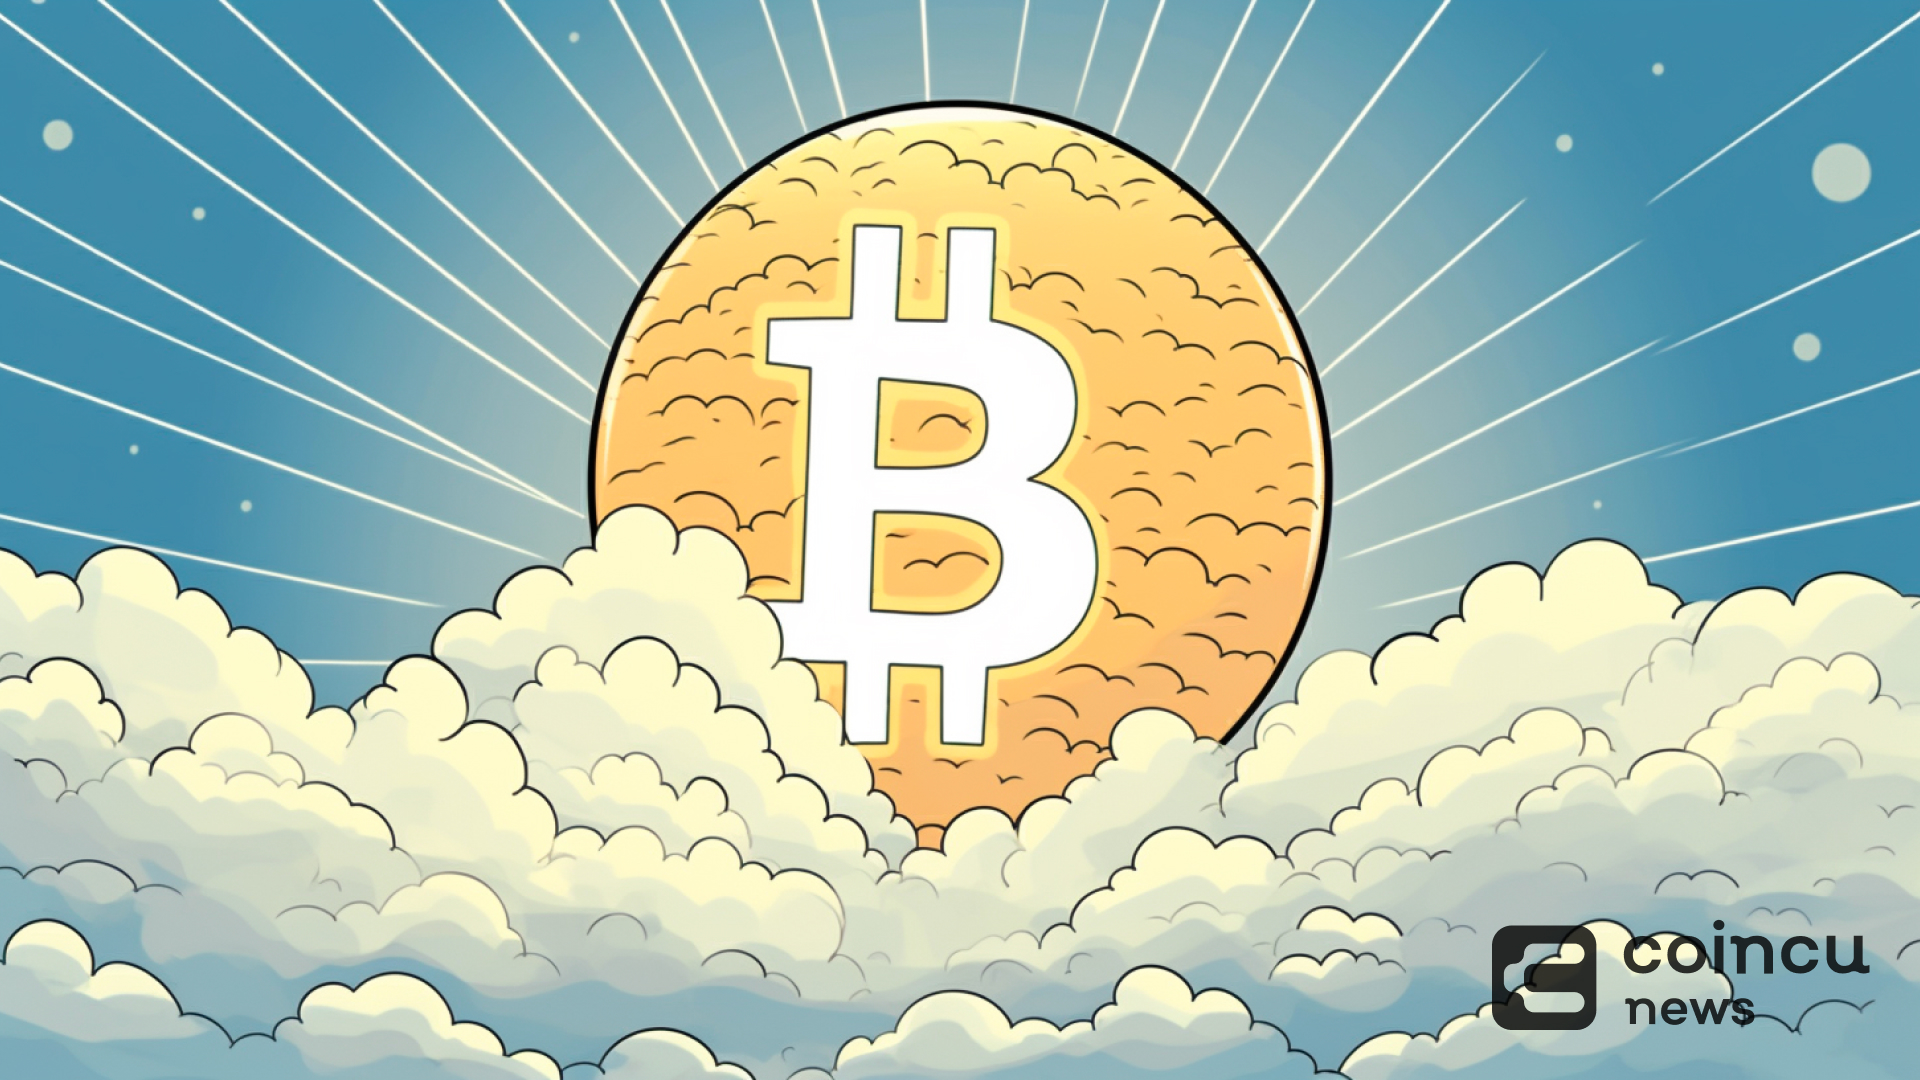 The Bitcoin Epic Satoshi Of The 4th Halving Was Auctioned For Over $2.1 Million